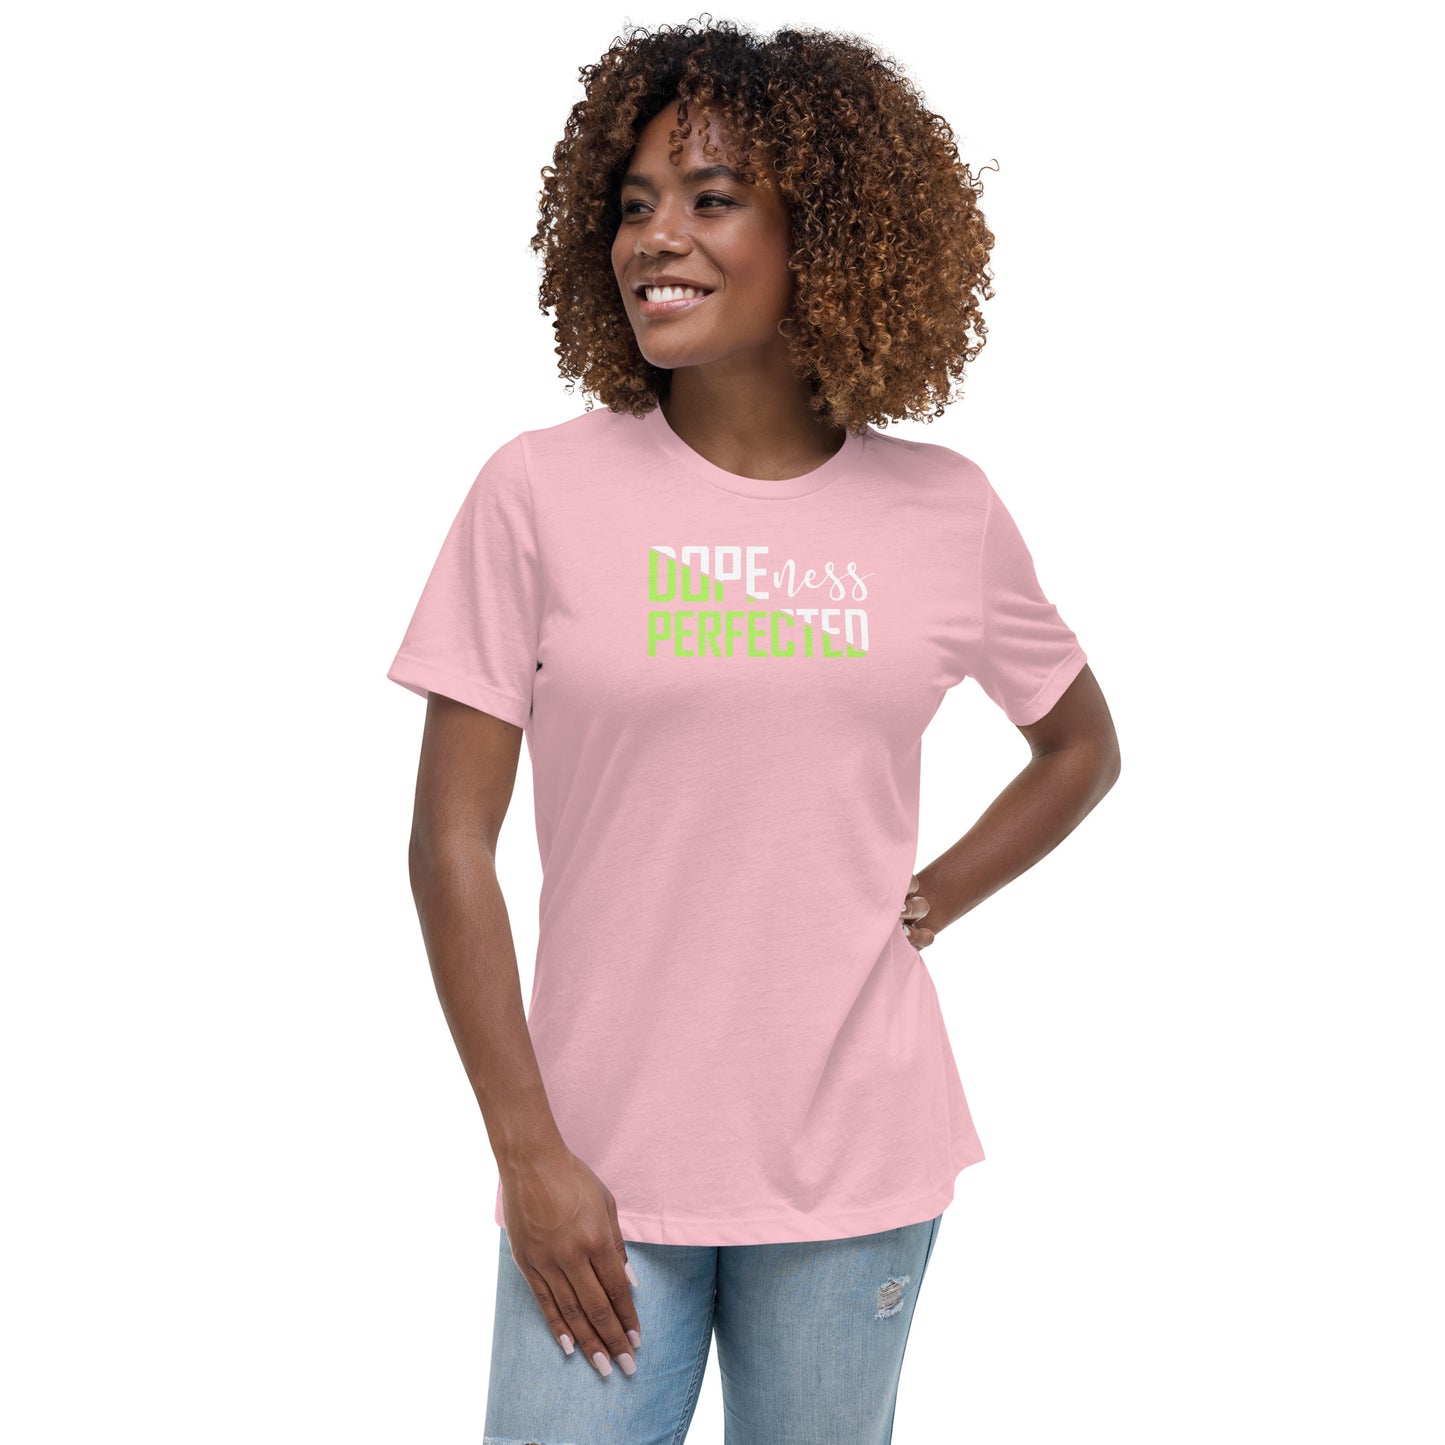 Dopeness Perfected - Women's Relaxed T-Shirt